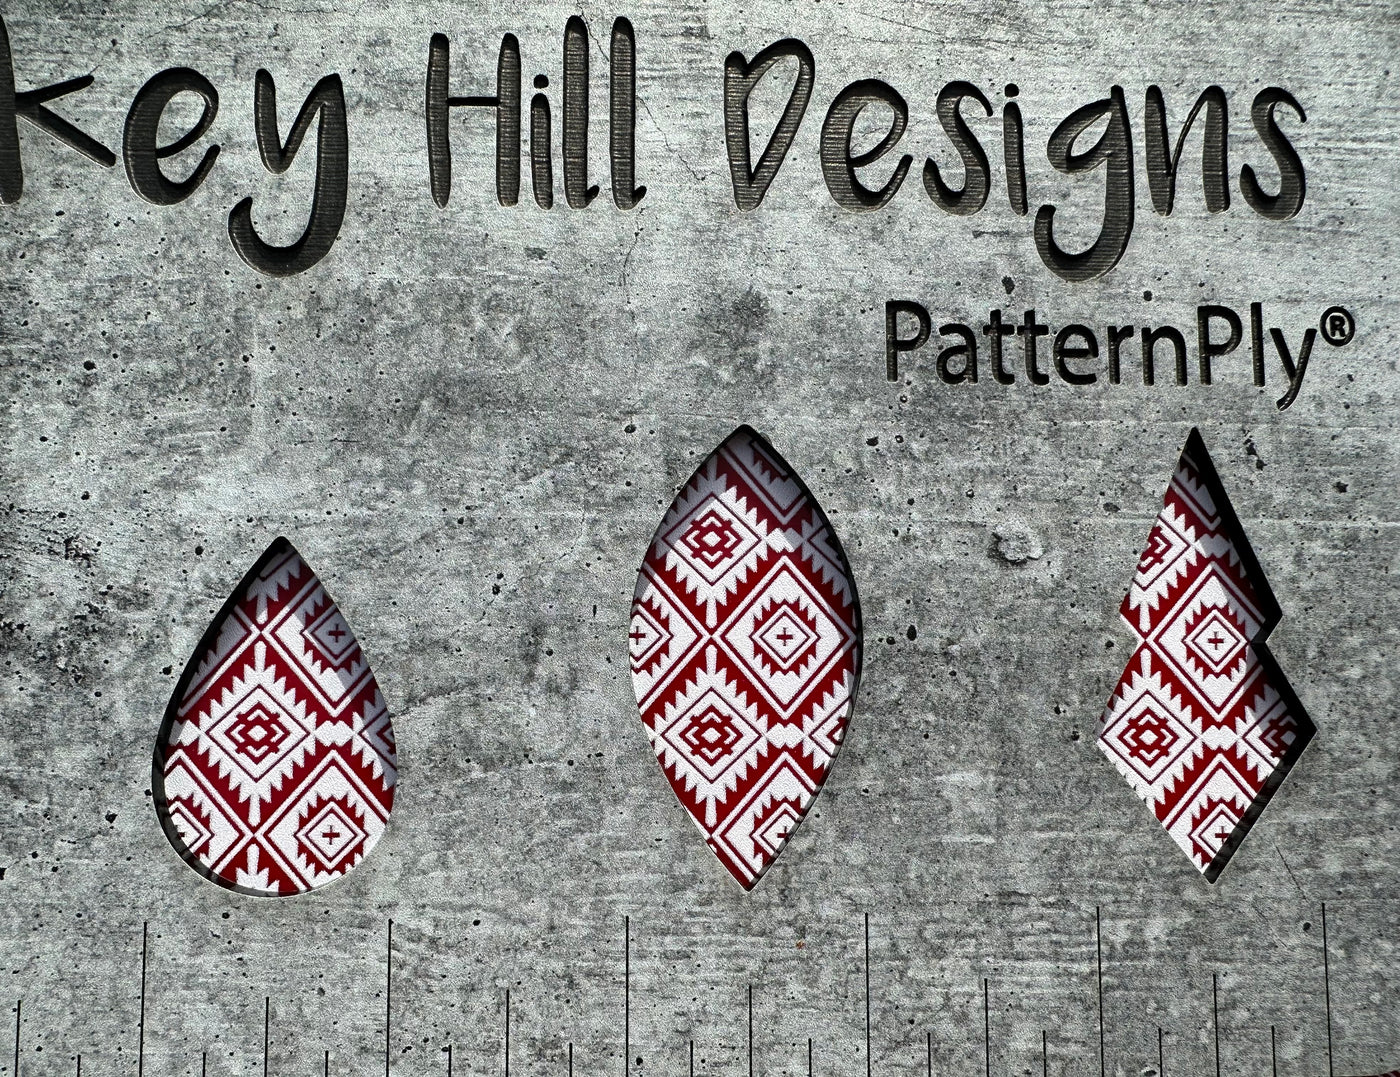 PatternPly® Scattered Aztec WHITE